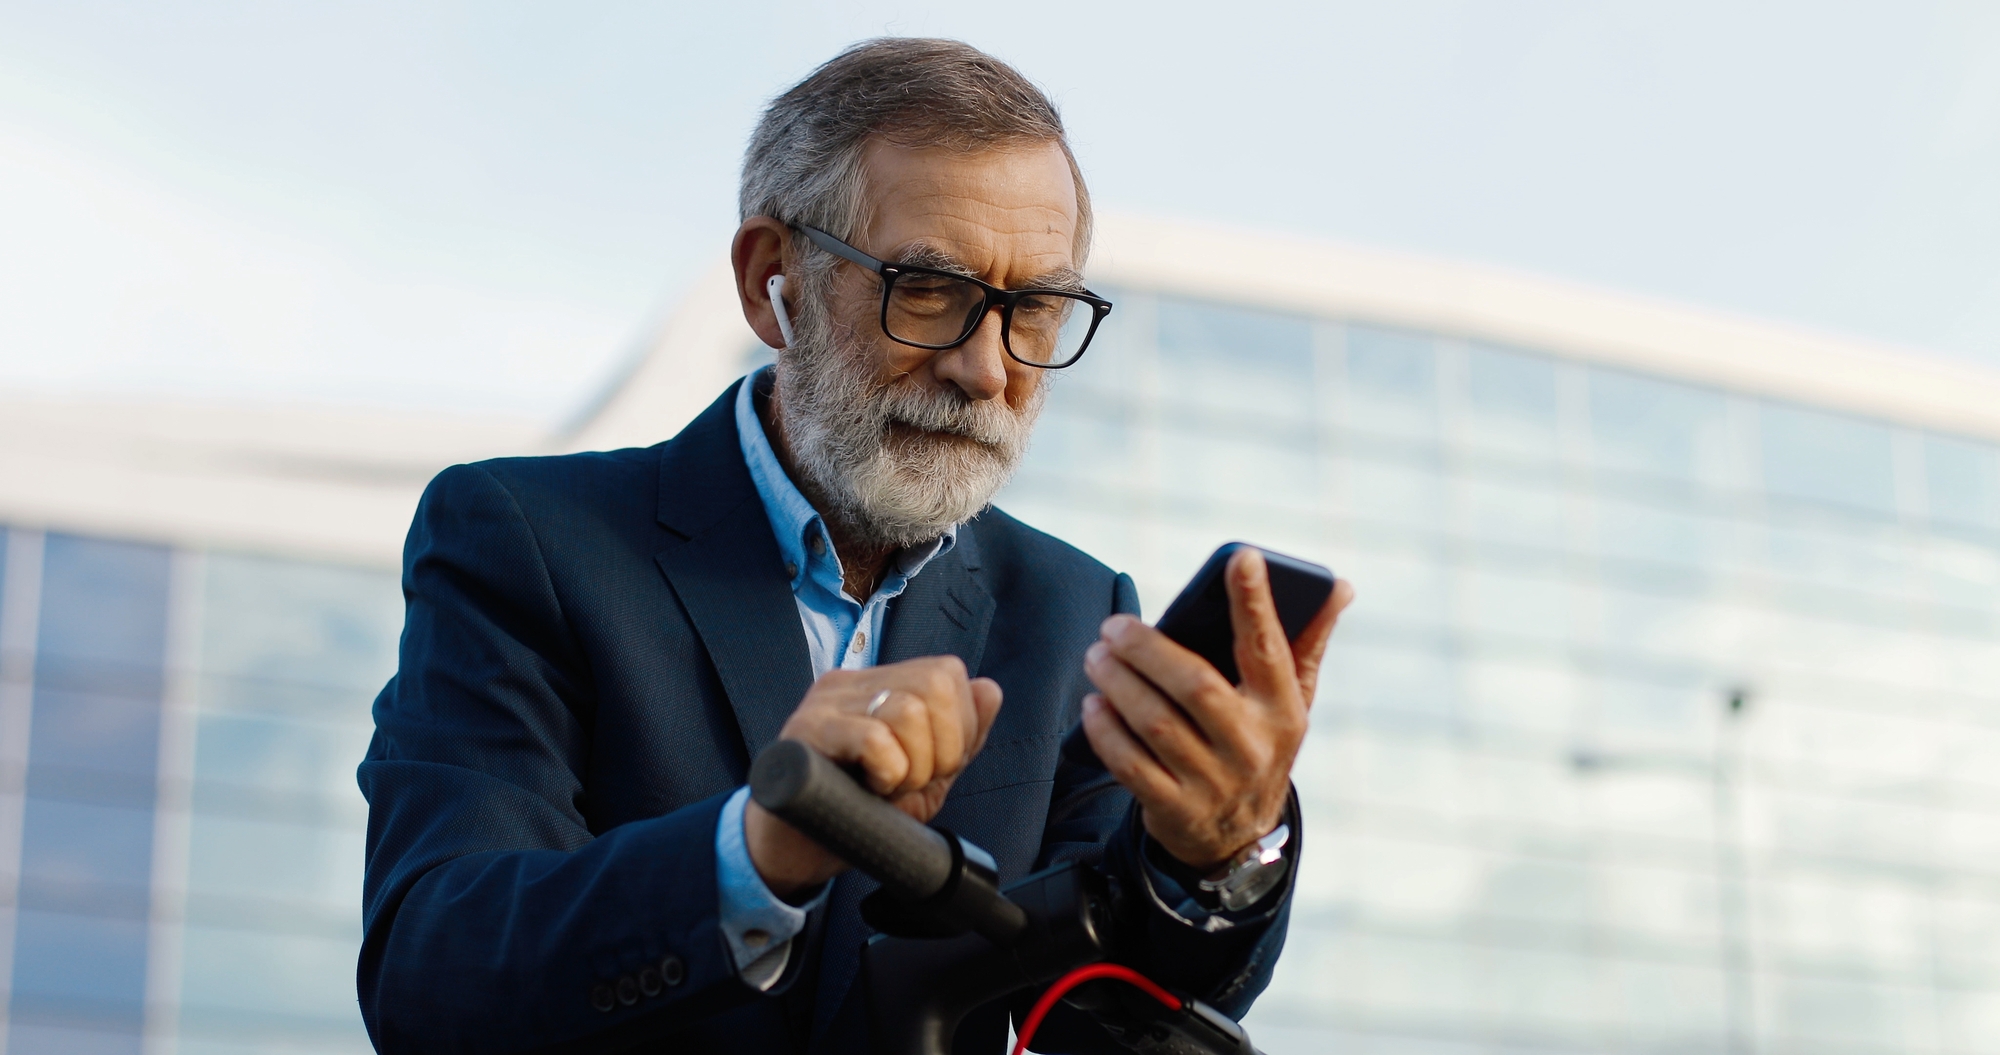 Senior gray-haired man in glasses and headphones standing at bike on street and tapping or scrolling on mobile phone . Old grandfather in airpods using smartphone and listening to music outdoor.